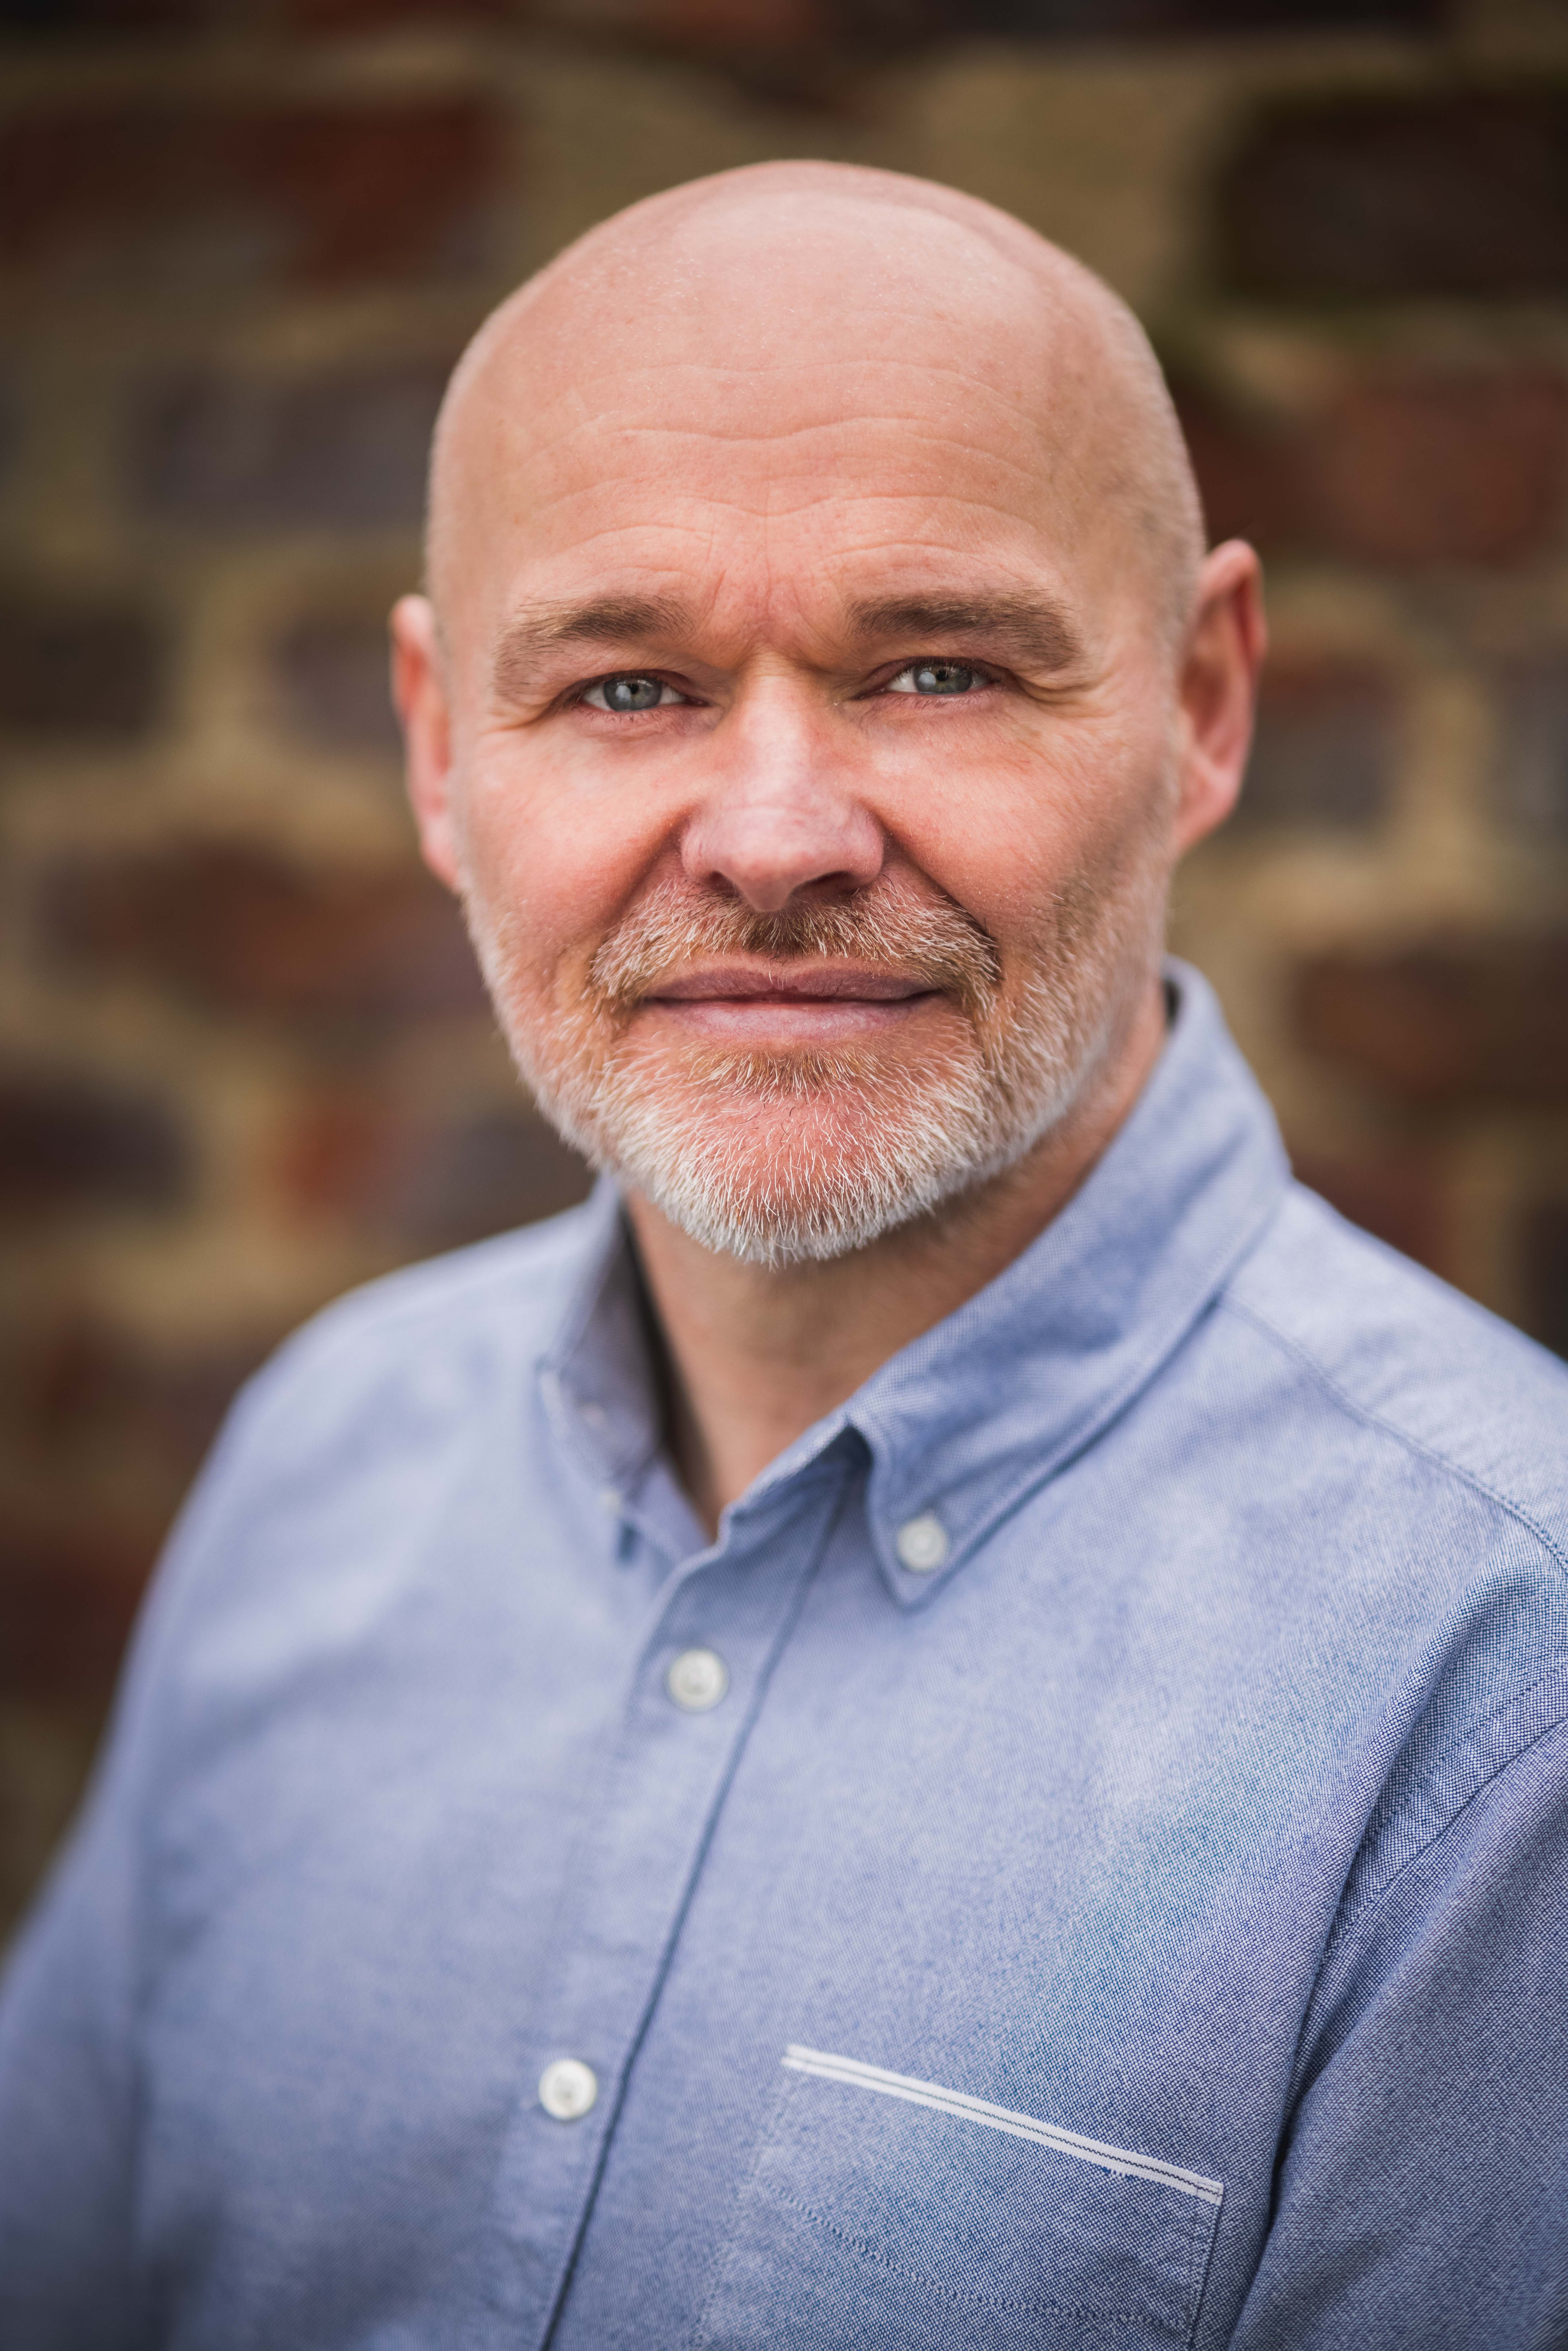 Simon McLaughlin, Founder/Director of Creed Communications. This photograph is a headshot of Simon wearing a blue shirt and a smile